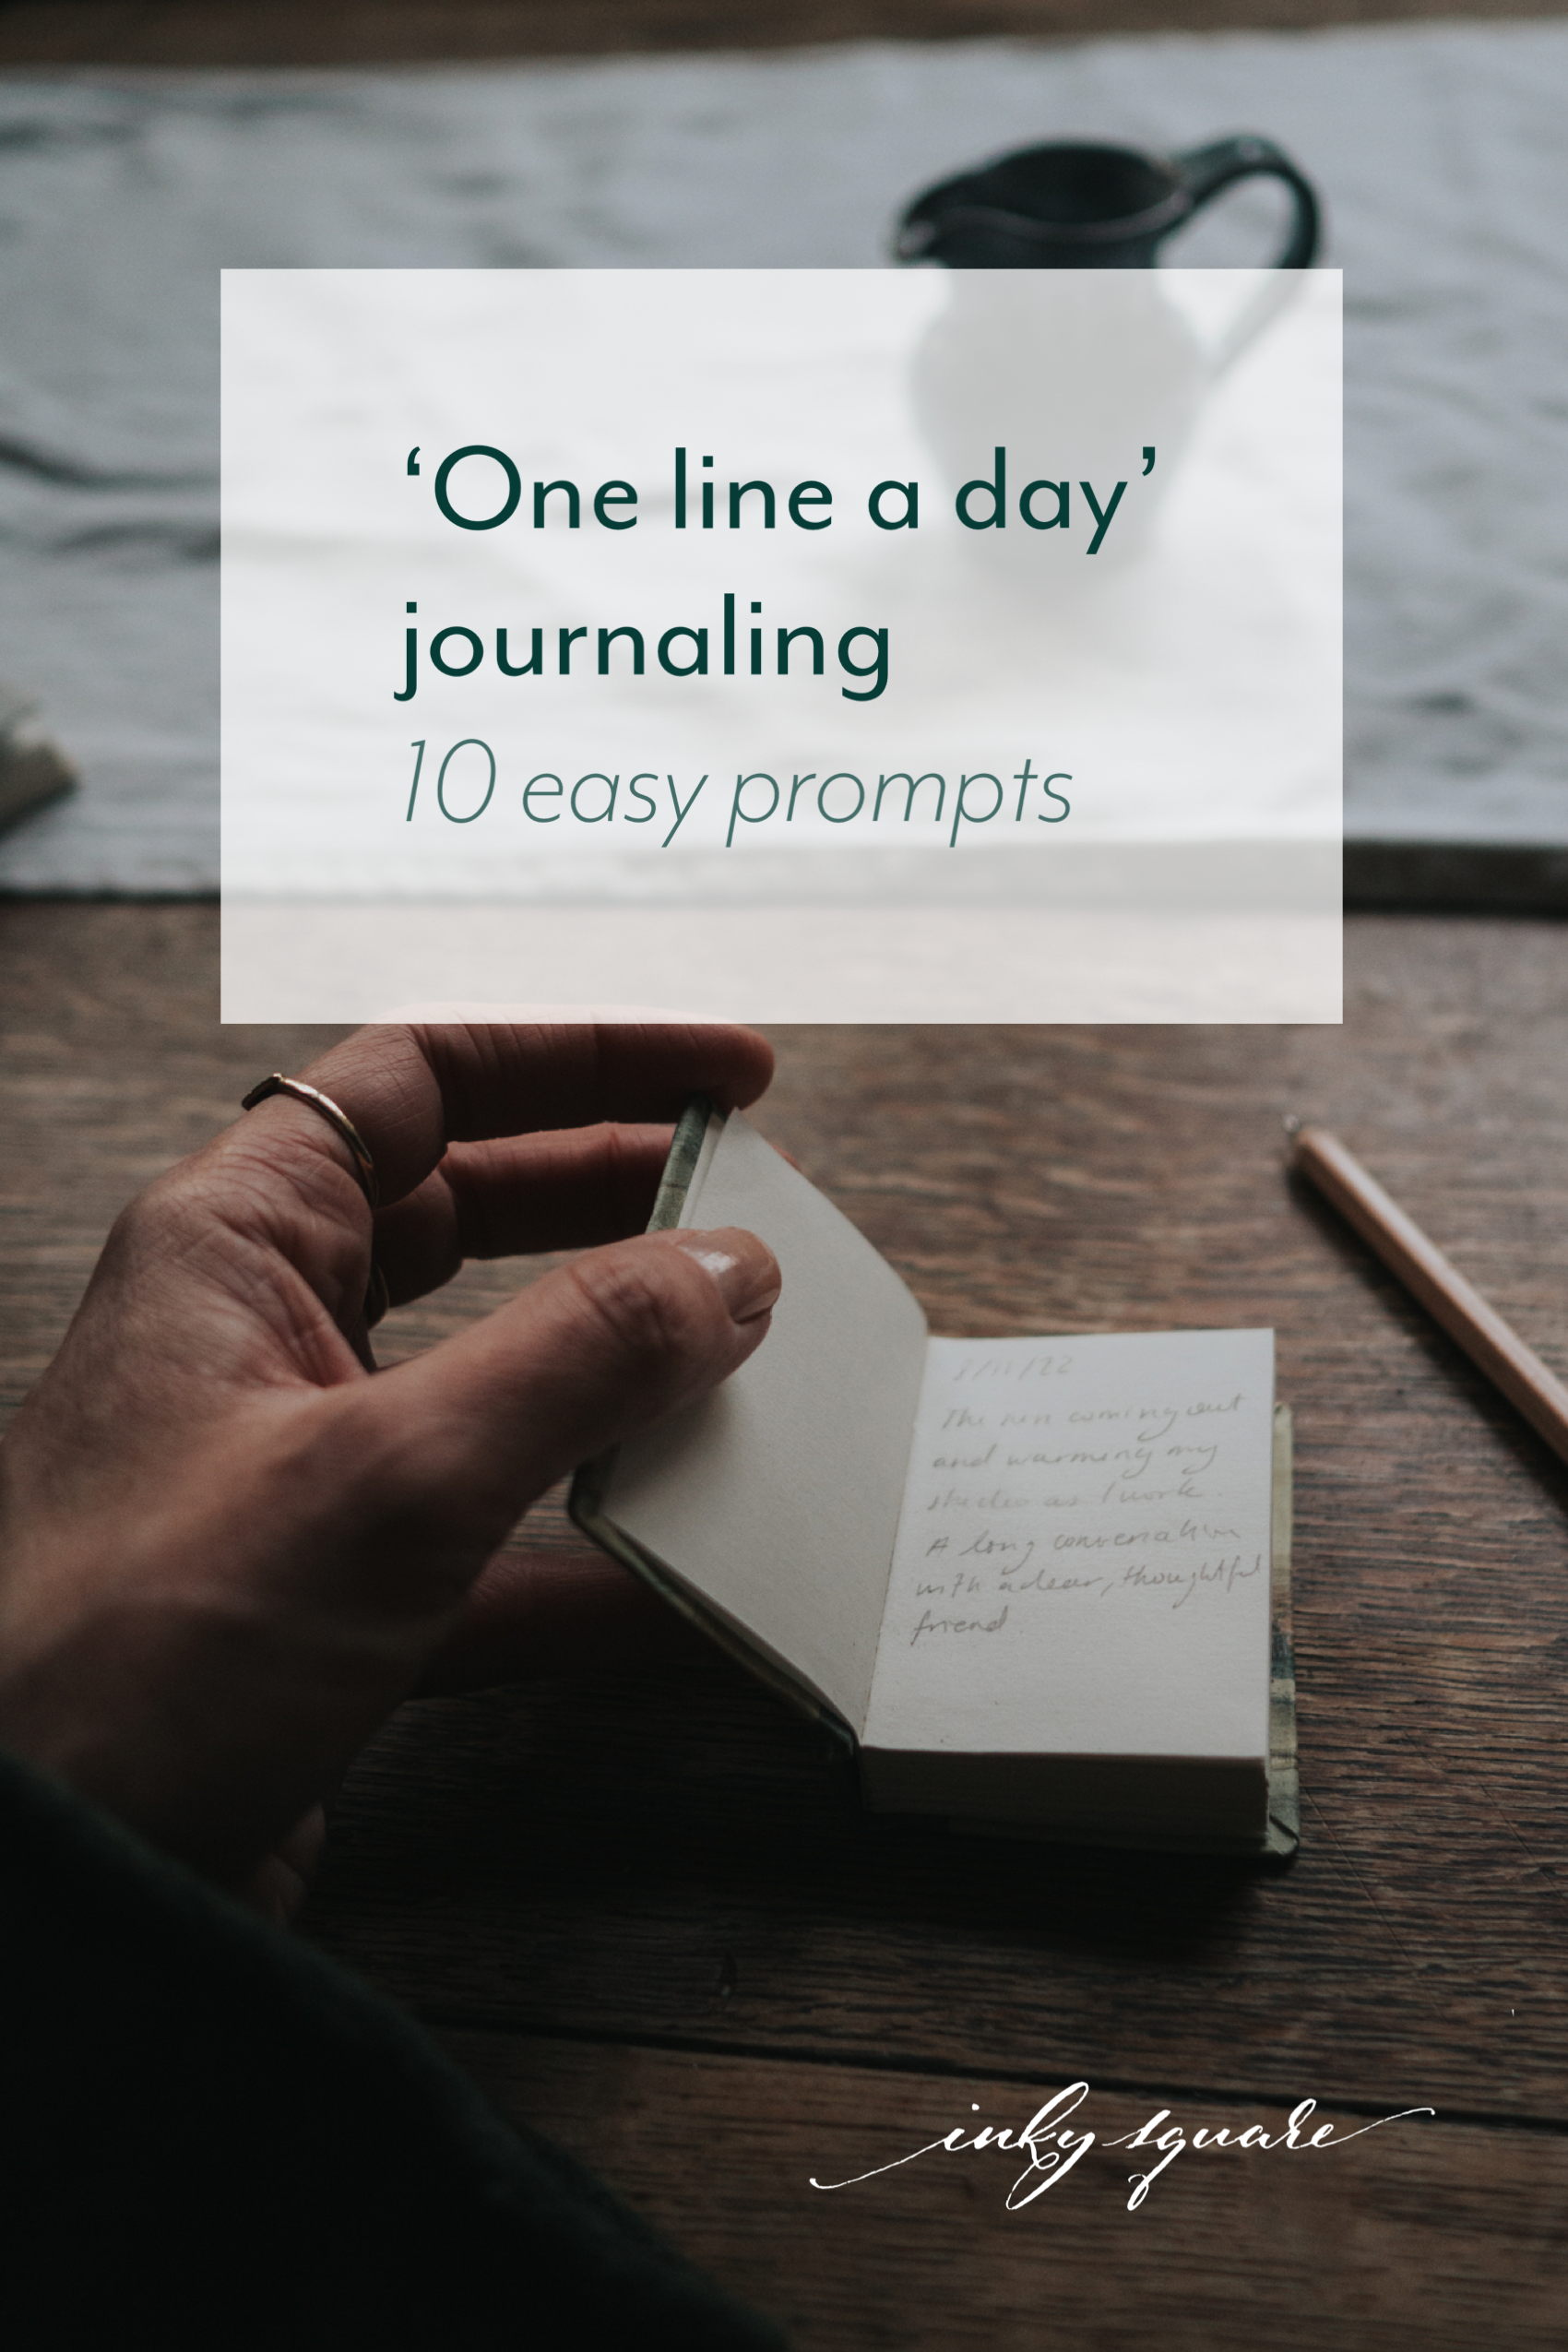 Gratitude One Line a Day: A Three-Year Memory Book